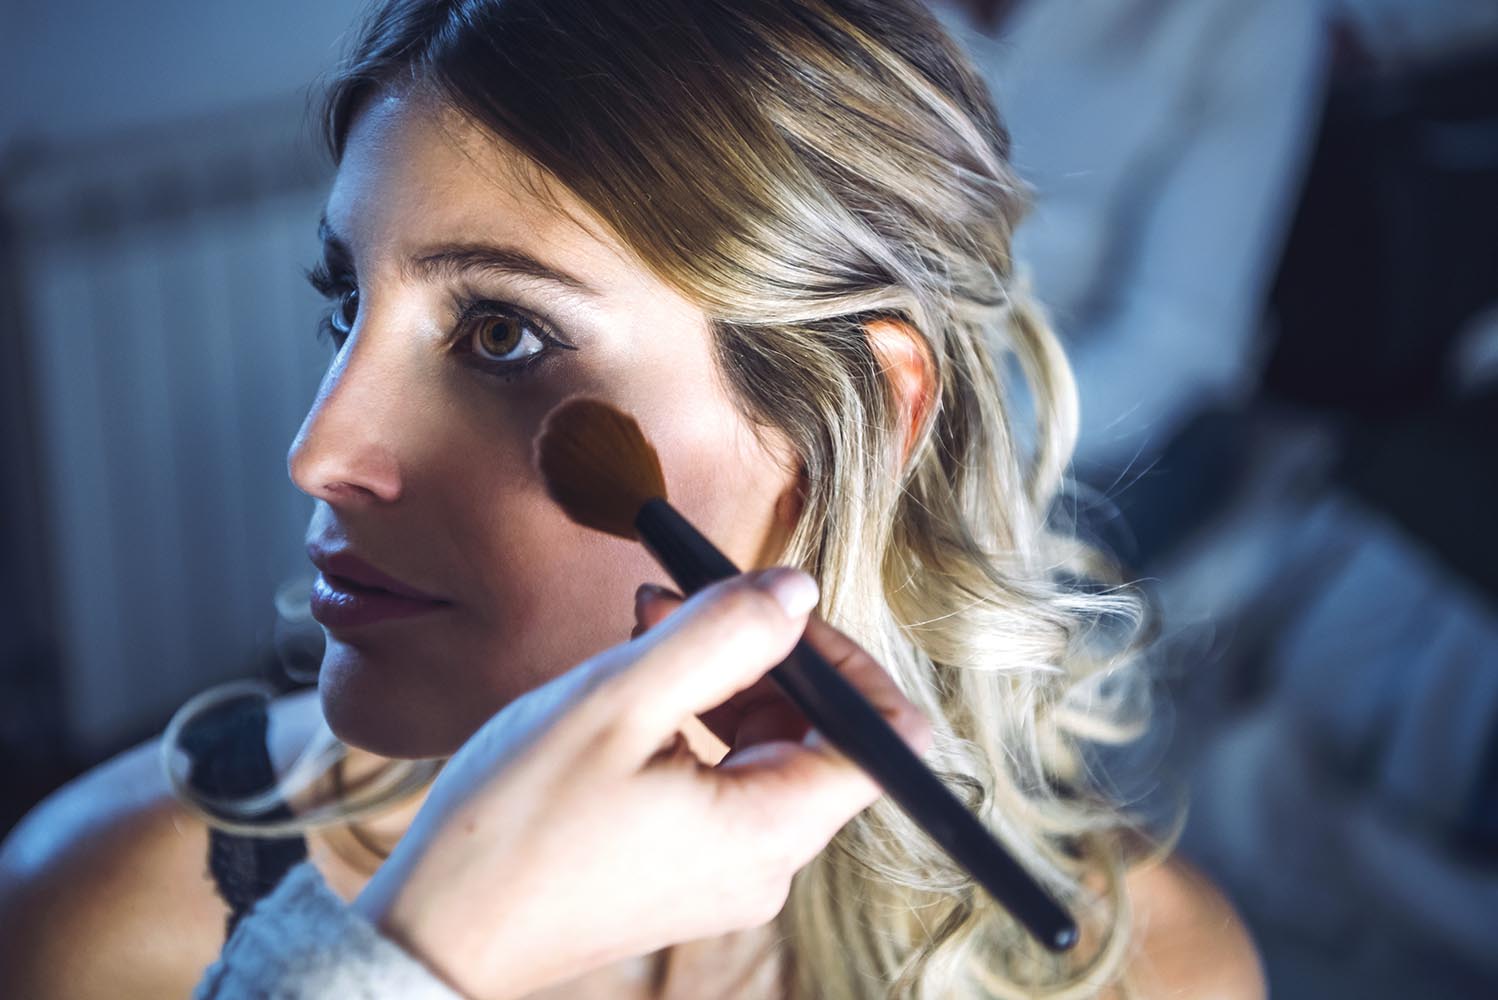 Female model putting on makeup